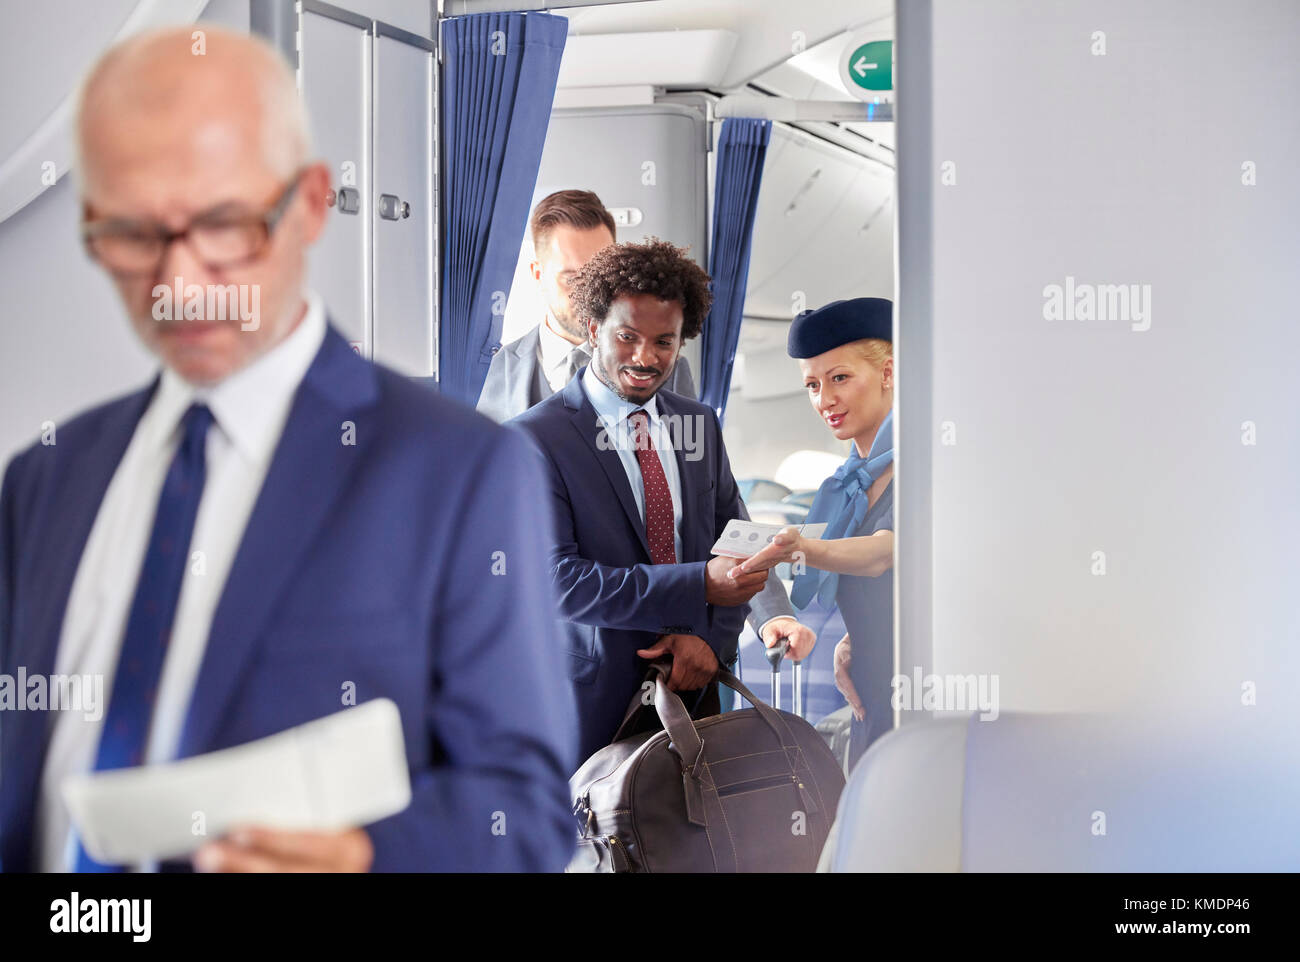 Flight attendant helping businessman with boarding pass on airplane Stock Photo